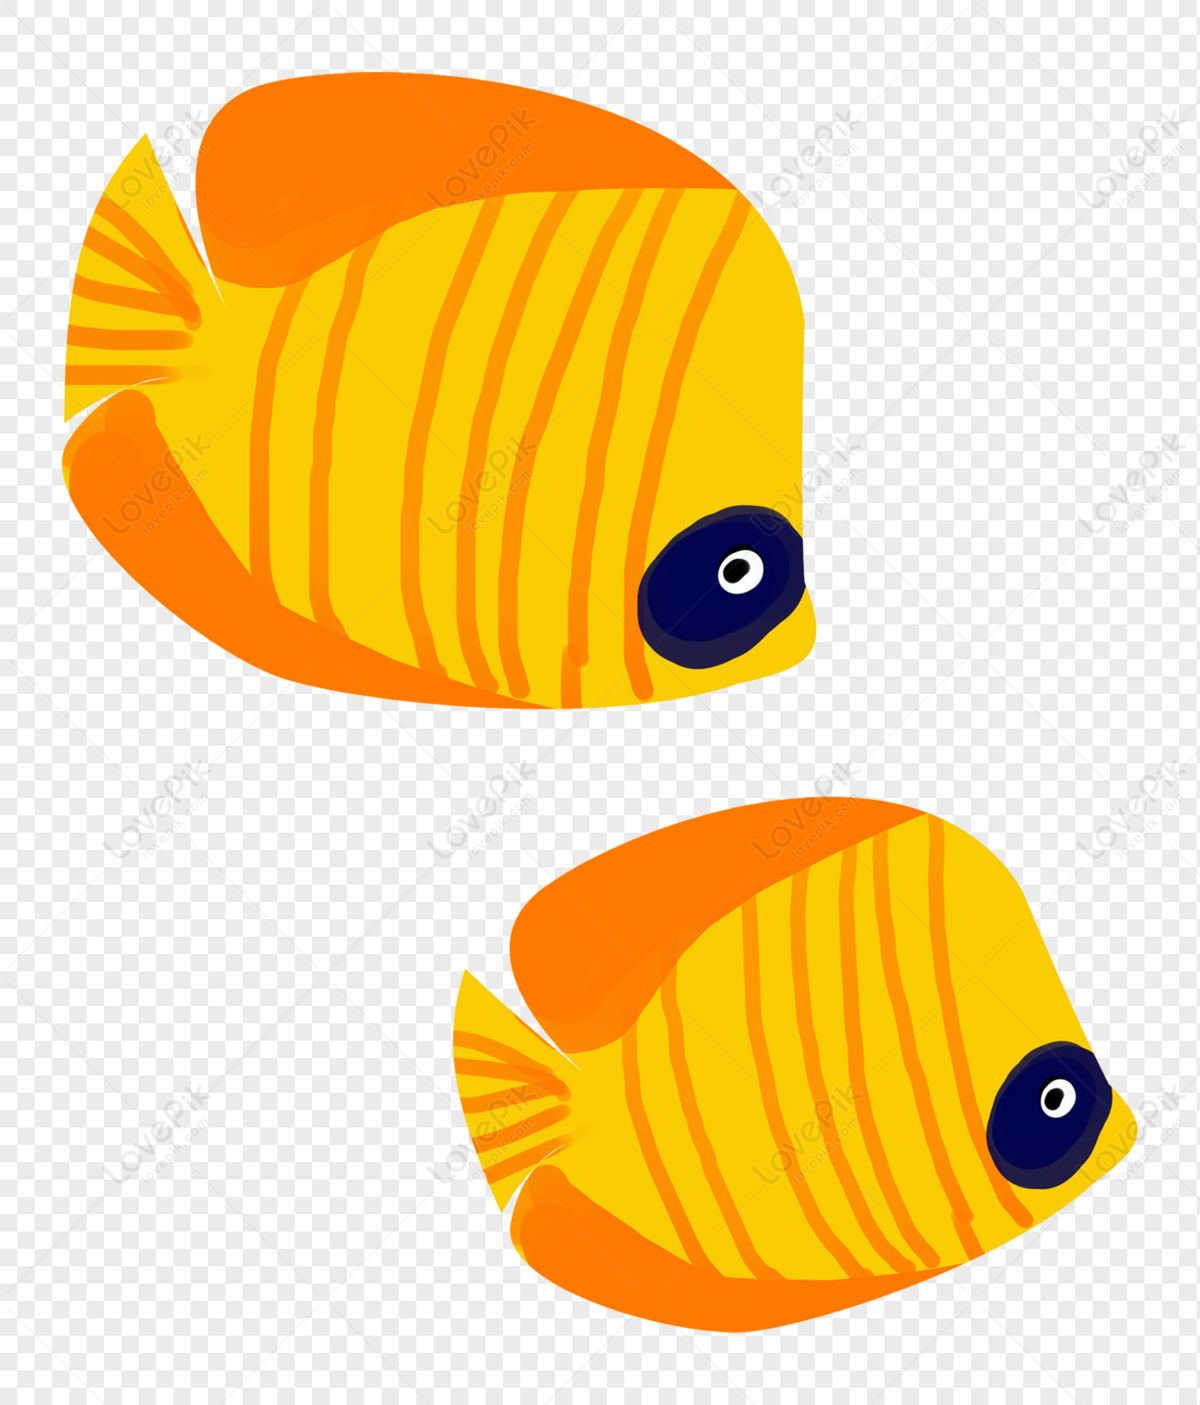 Tropical Fish PNG Image Free Download And Clipart Image For Free Download -  Lovepik | 400216461